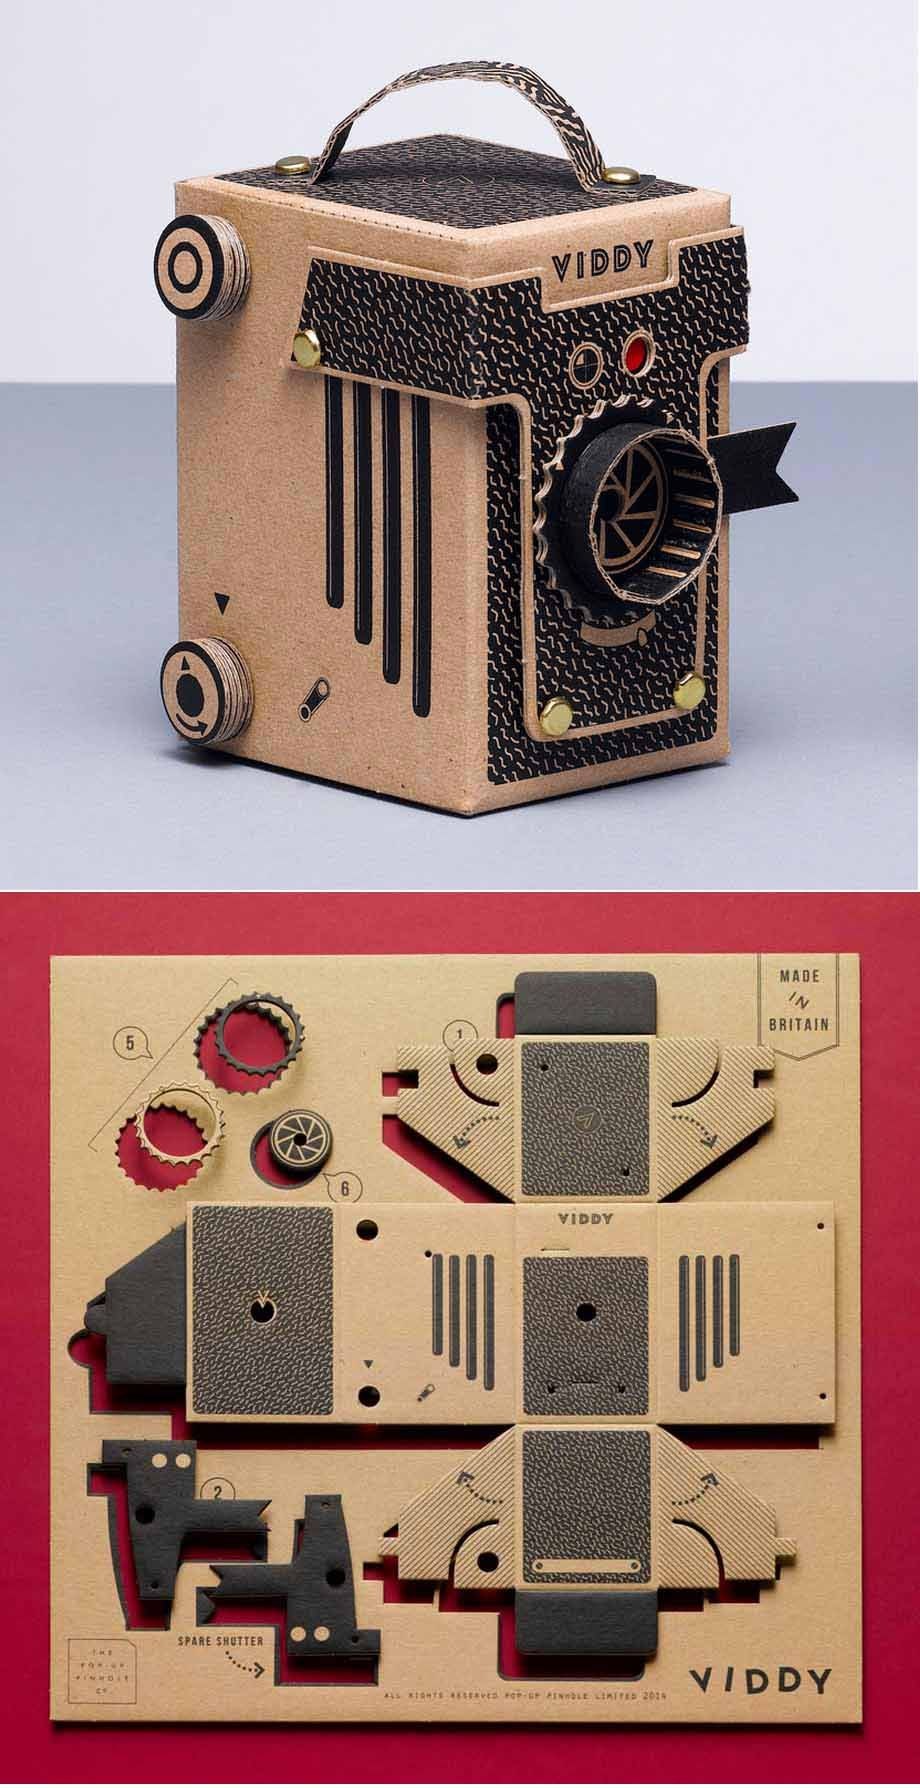 Camera Papercraft Viddy is A Do It Yourself Pinhole Camera Kit Made From tough